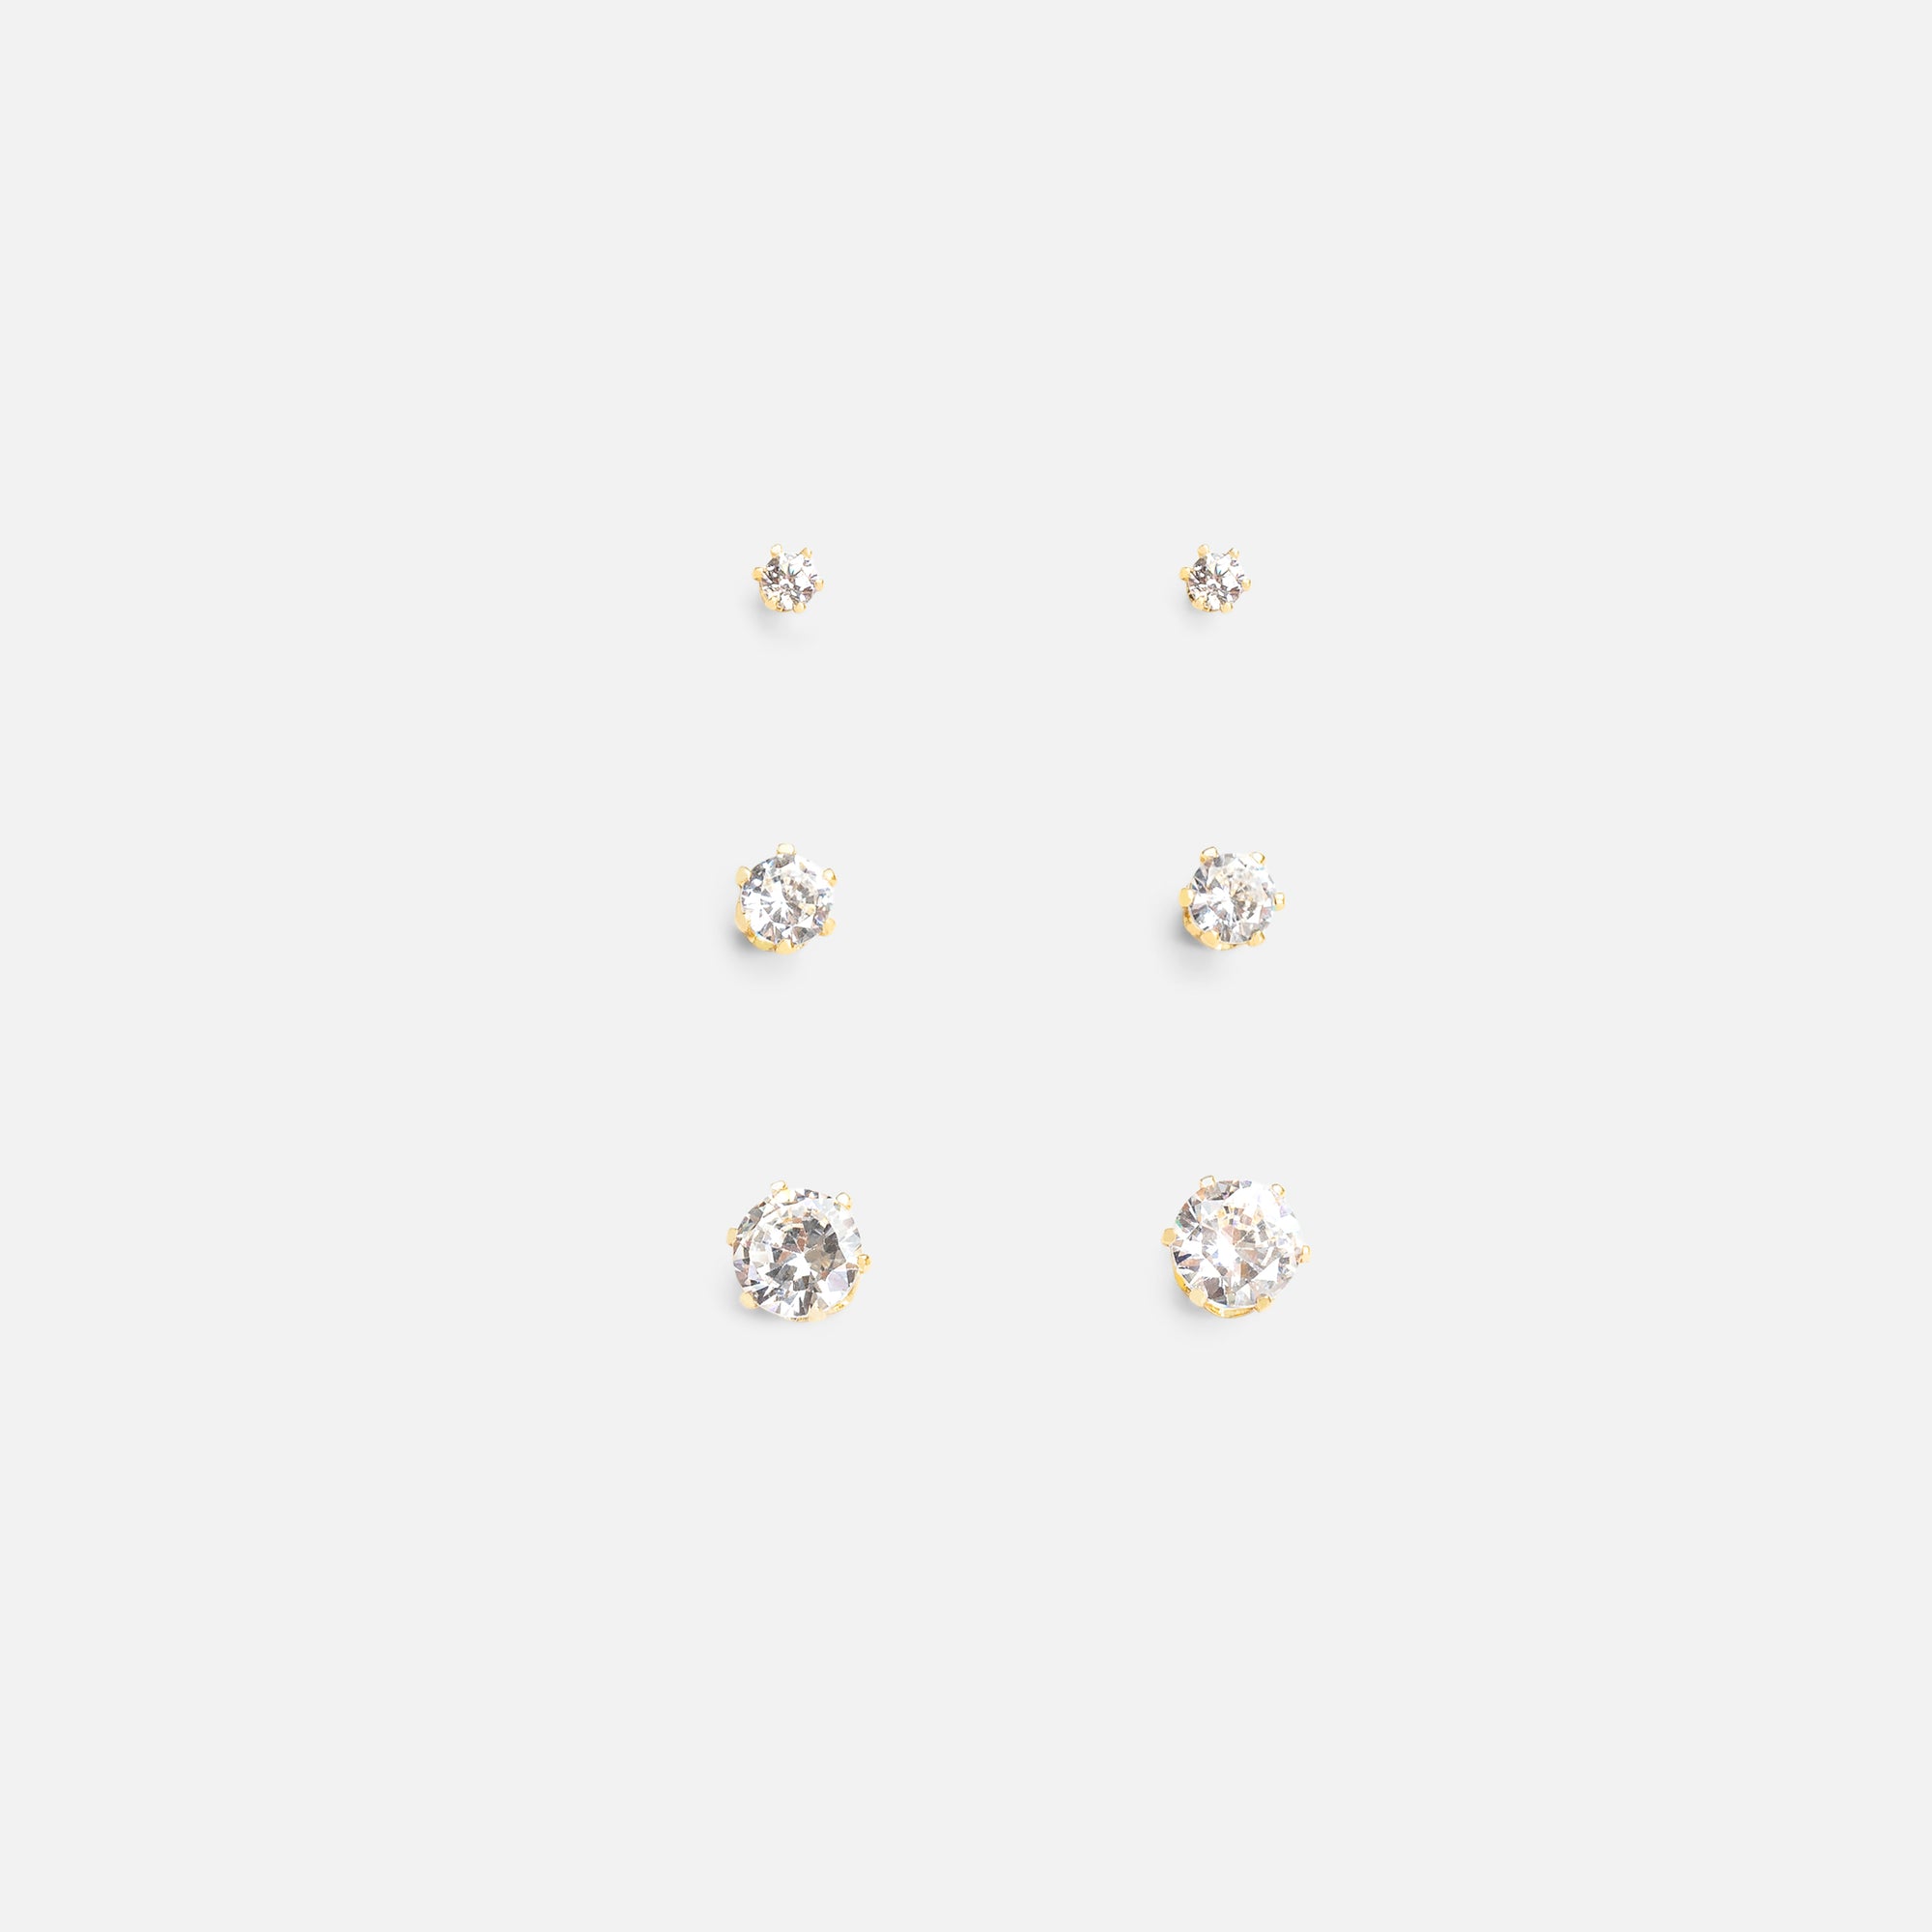 Set of three gold earrings with cubic zirconia